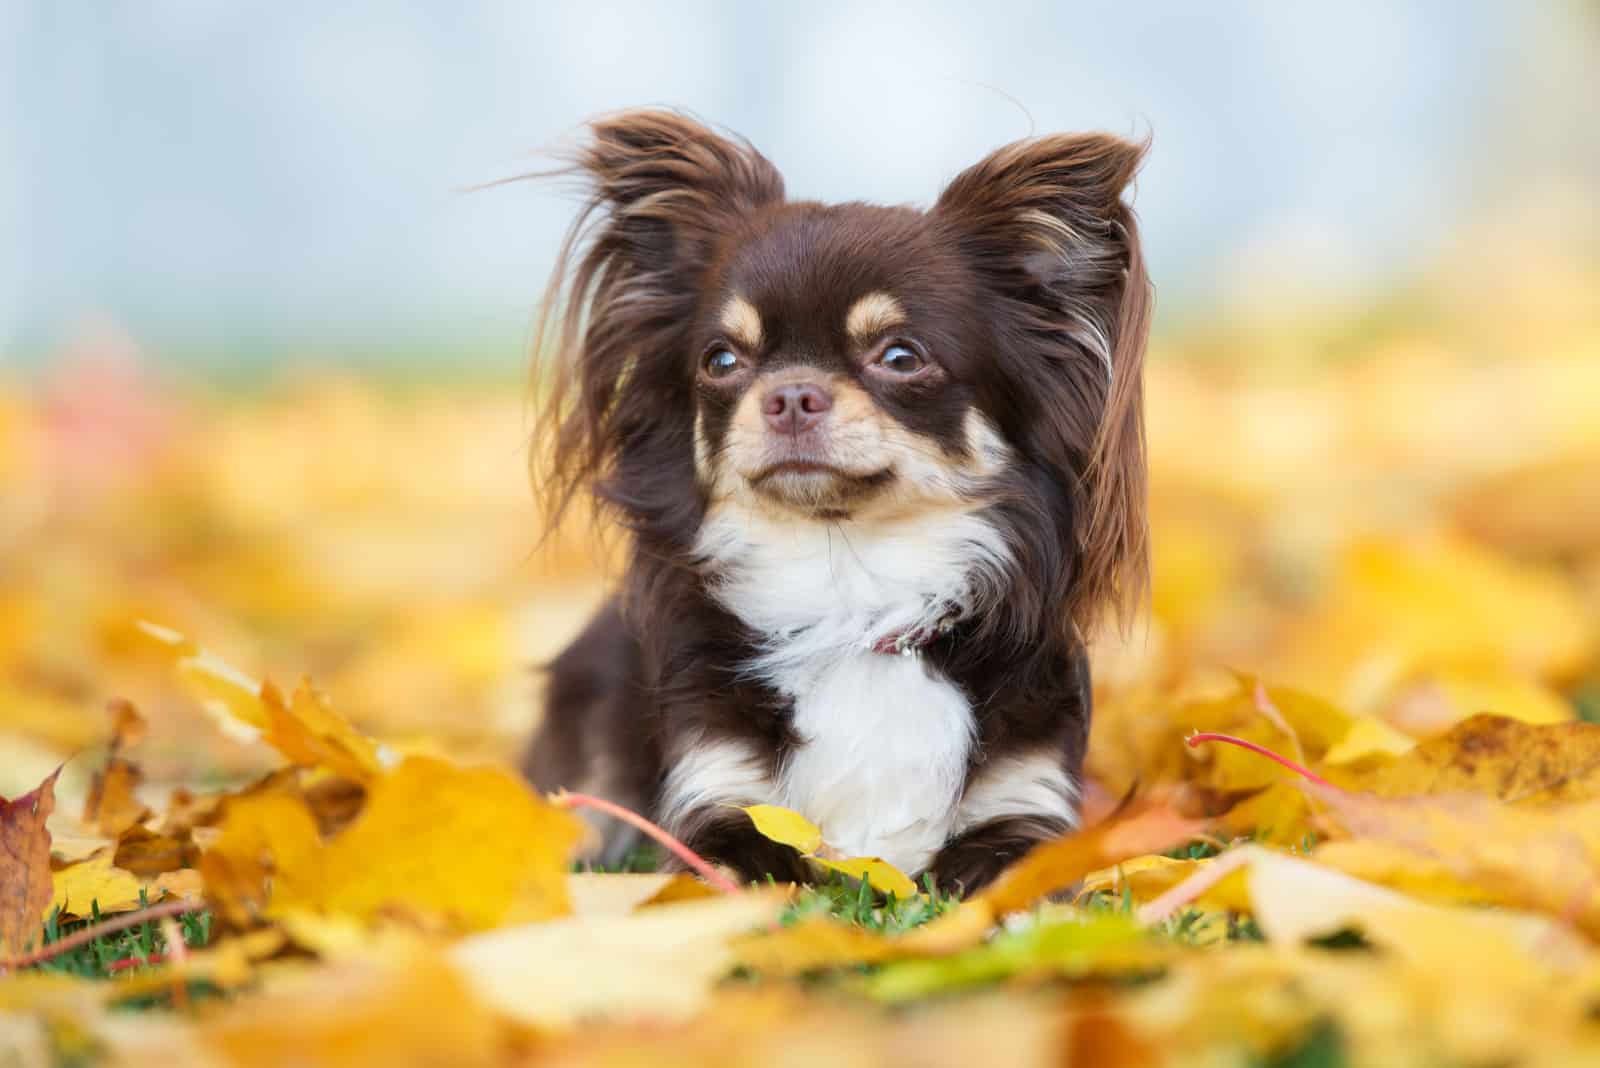 brown chihuahua dog posing in fallen leaves